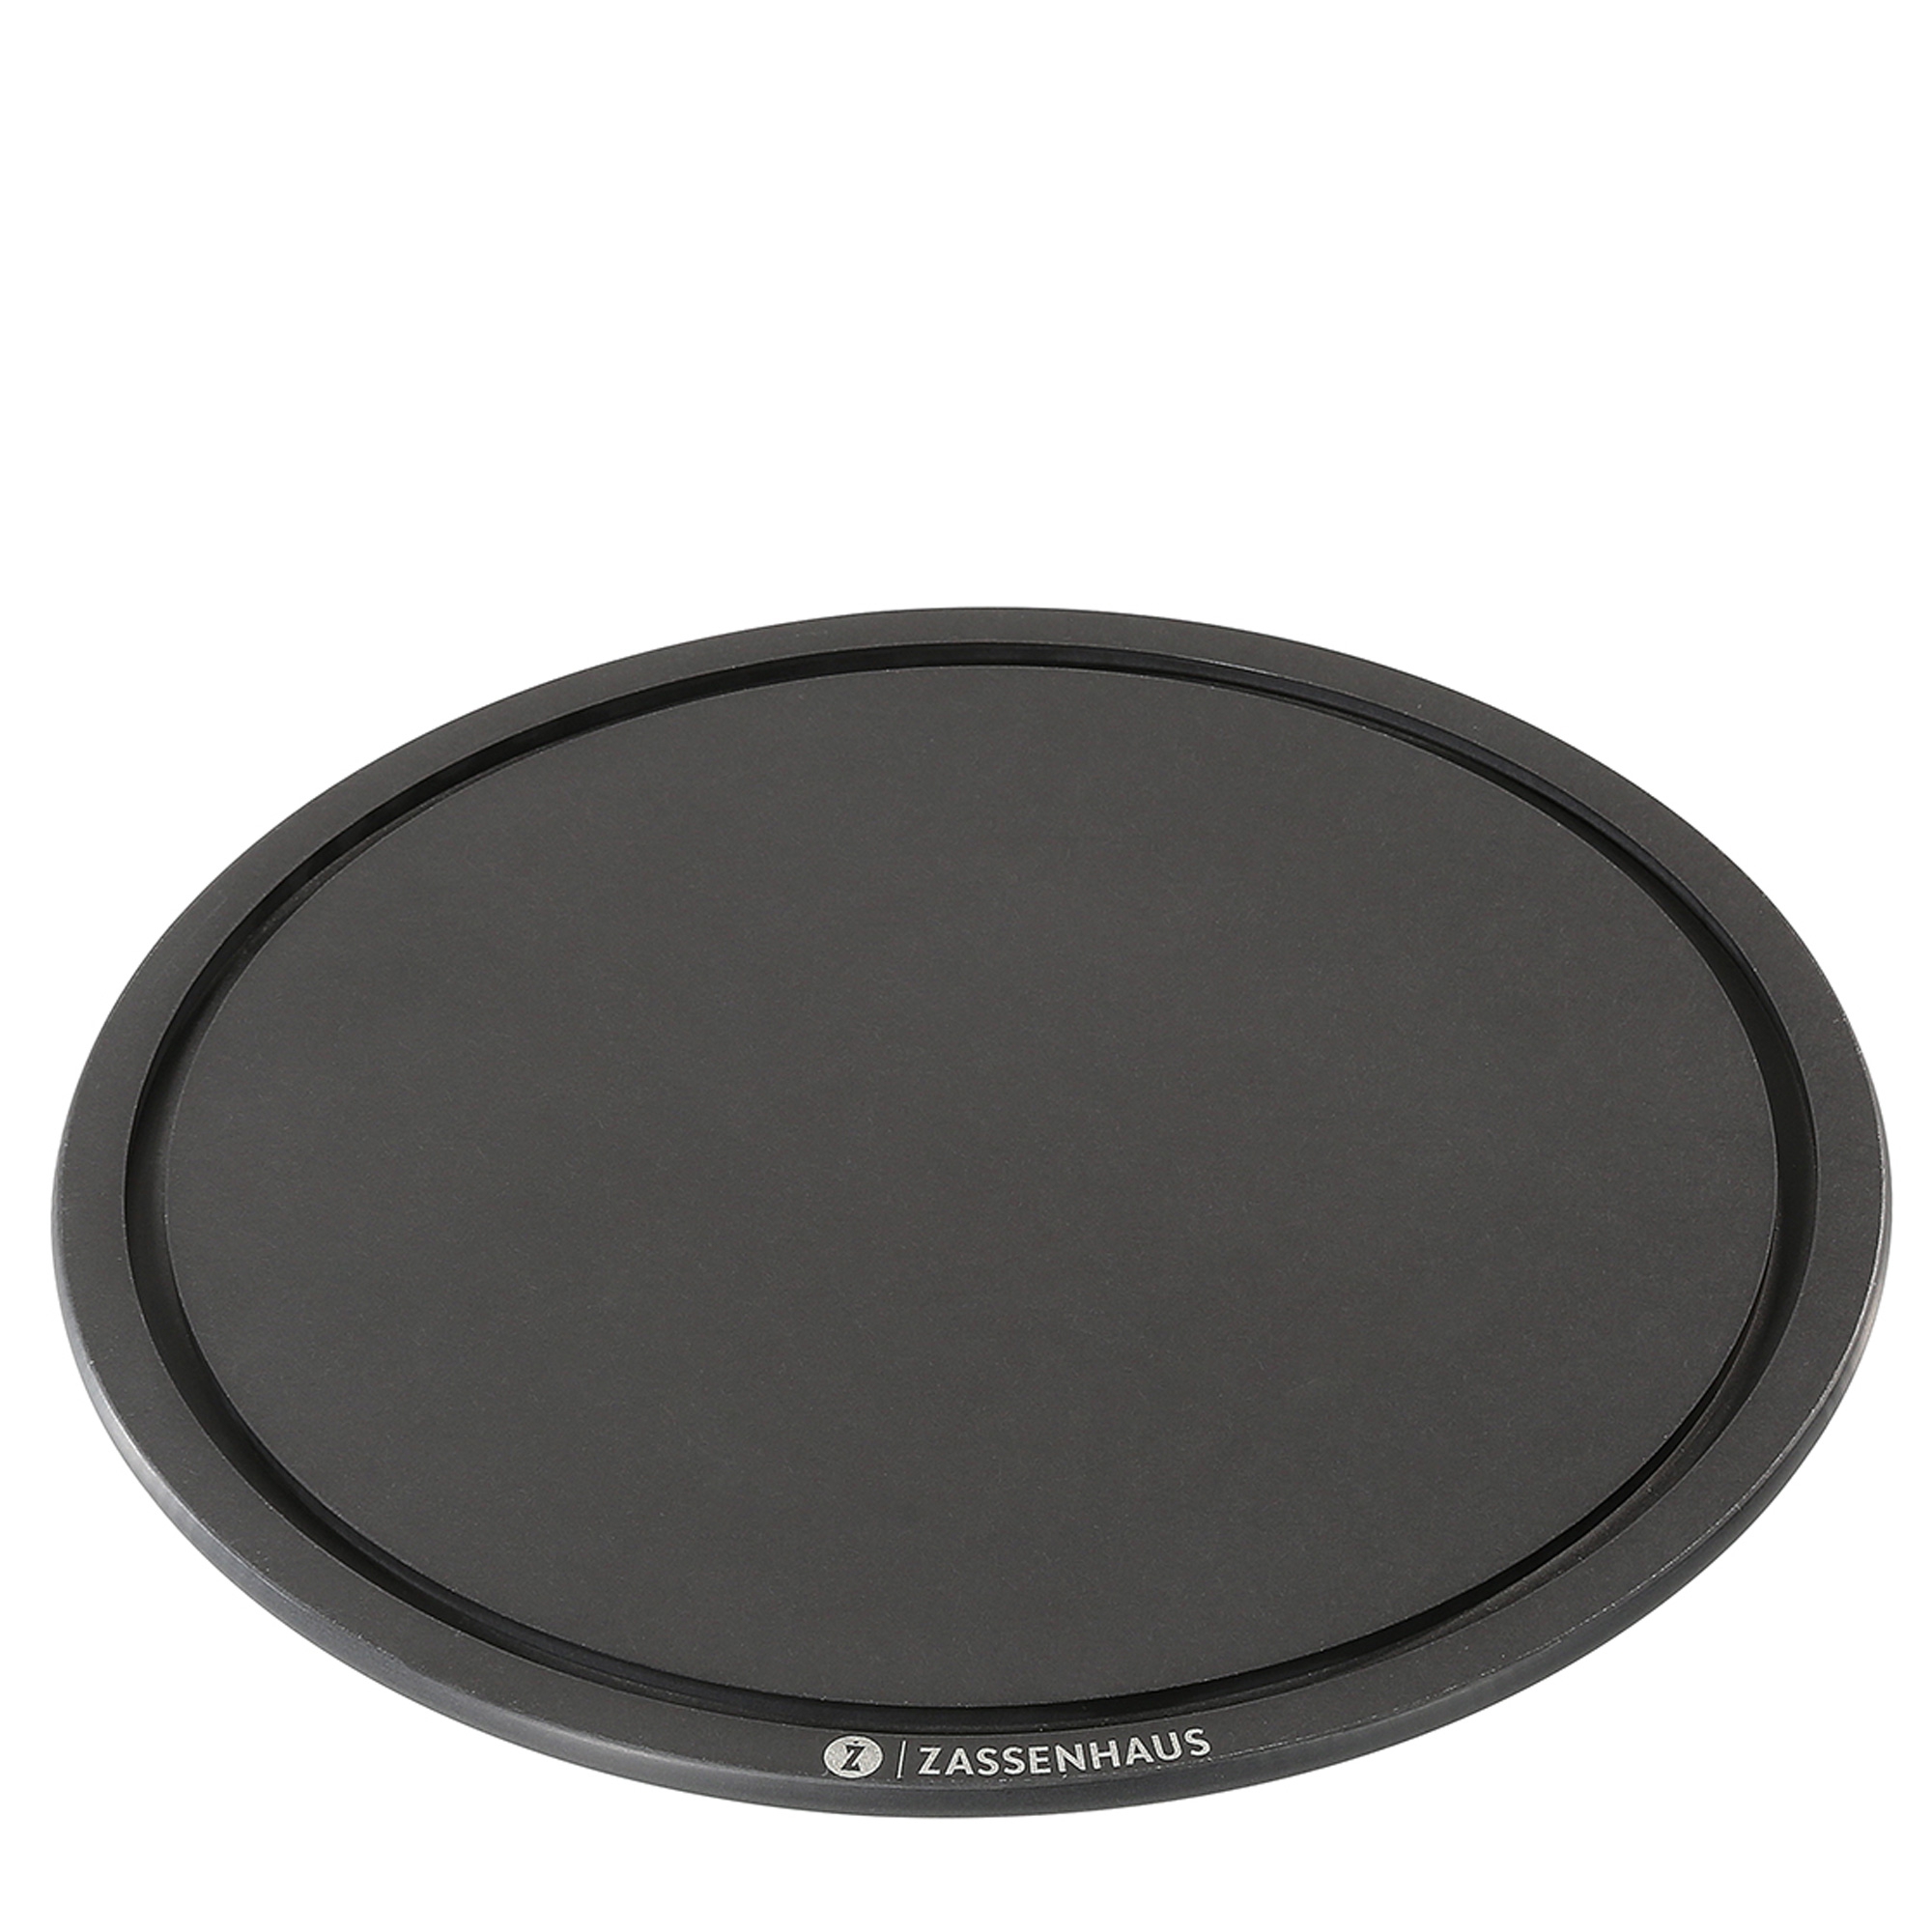 Zassenhaus - COMFORT PLUS cheese cover with glass lid - 23 cm